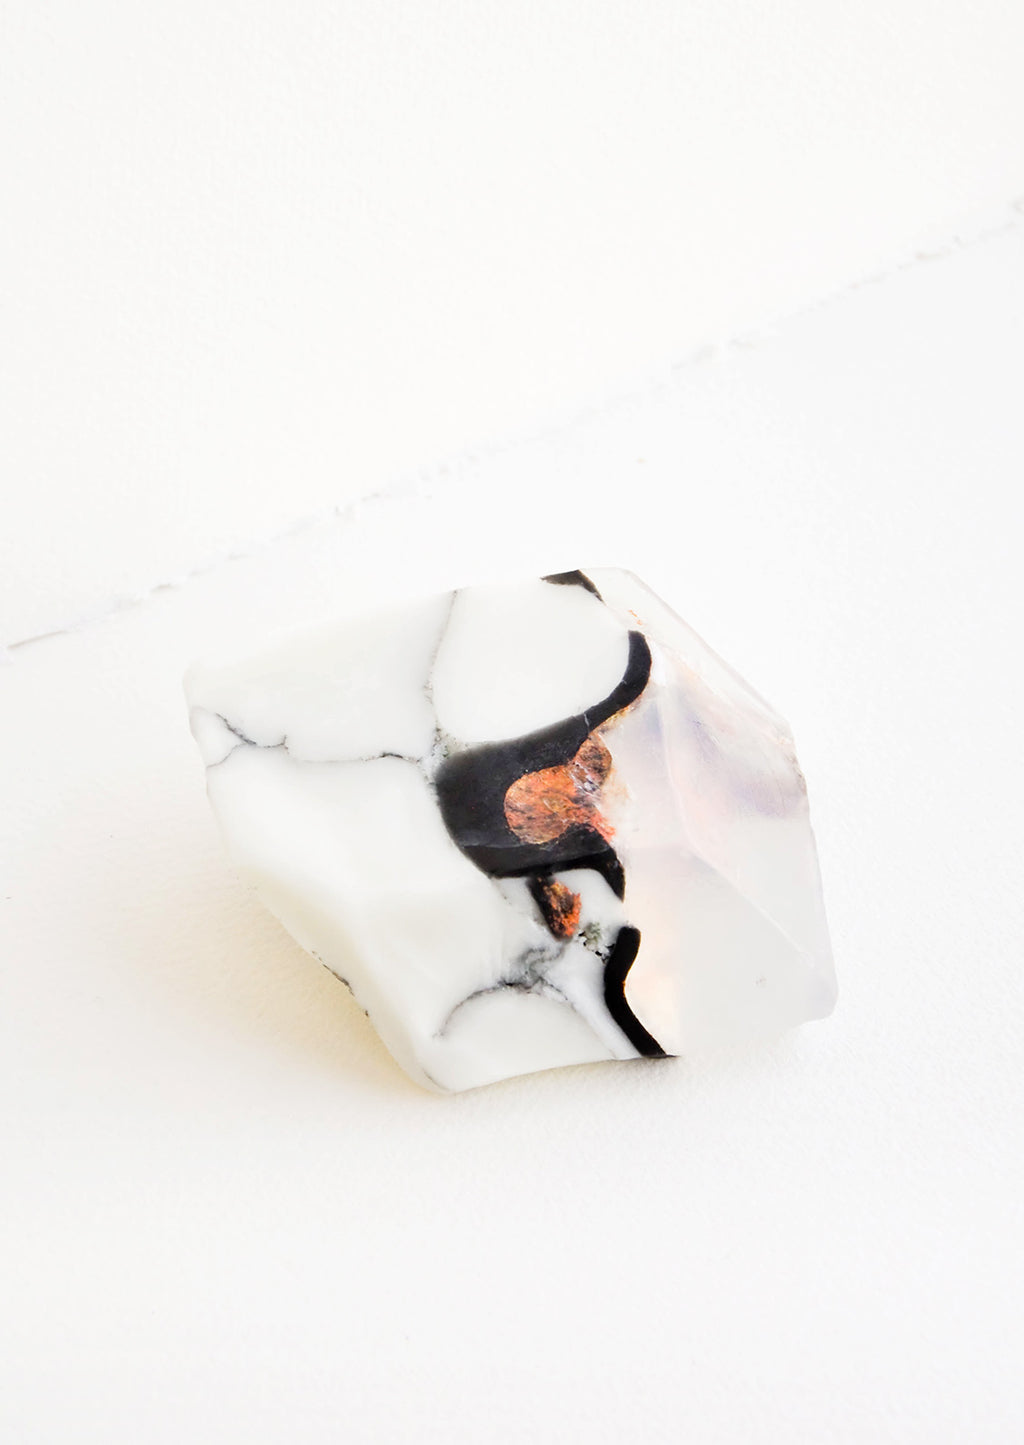 Marble: Bar soap in the form of a realistic looking marble gemstone